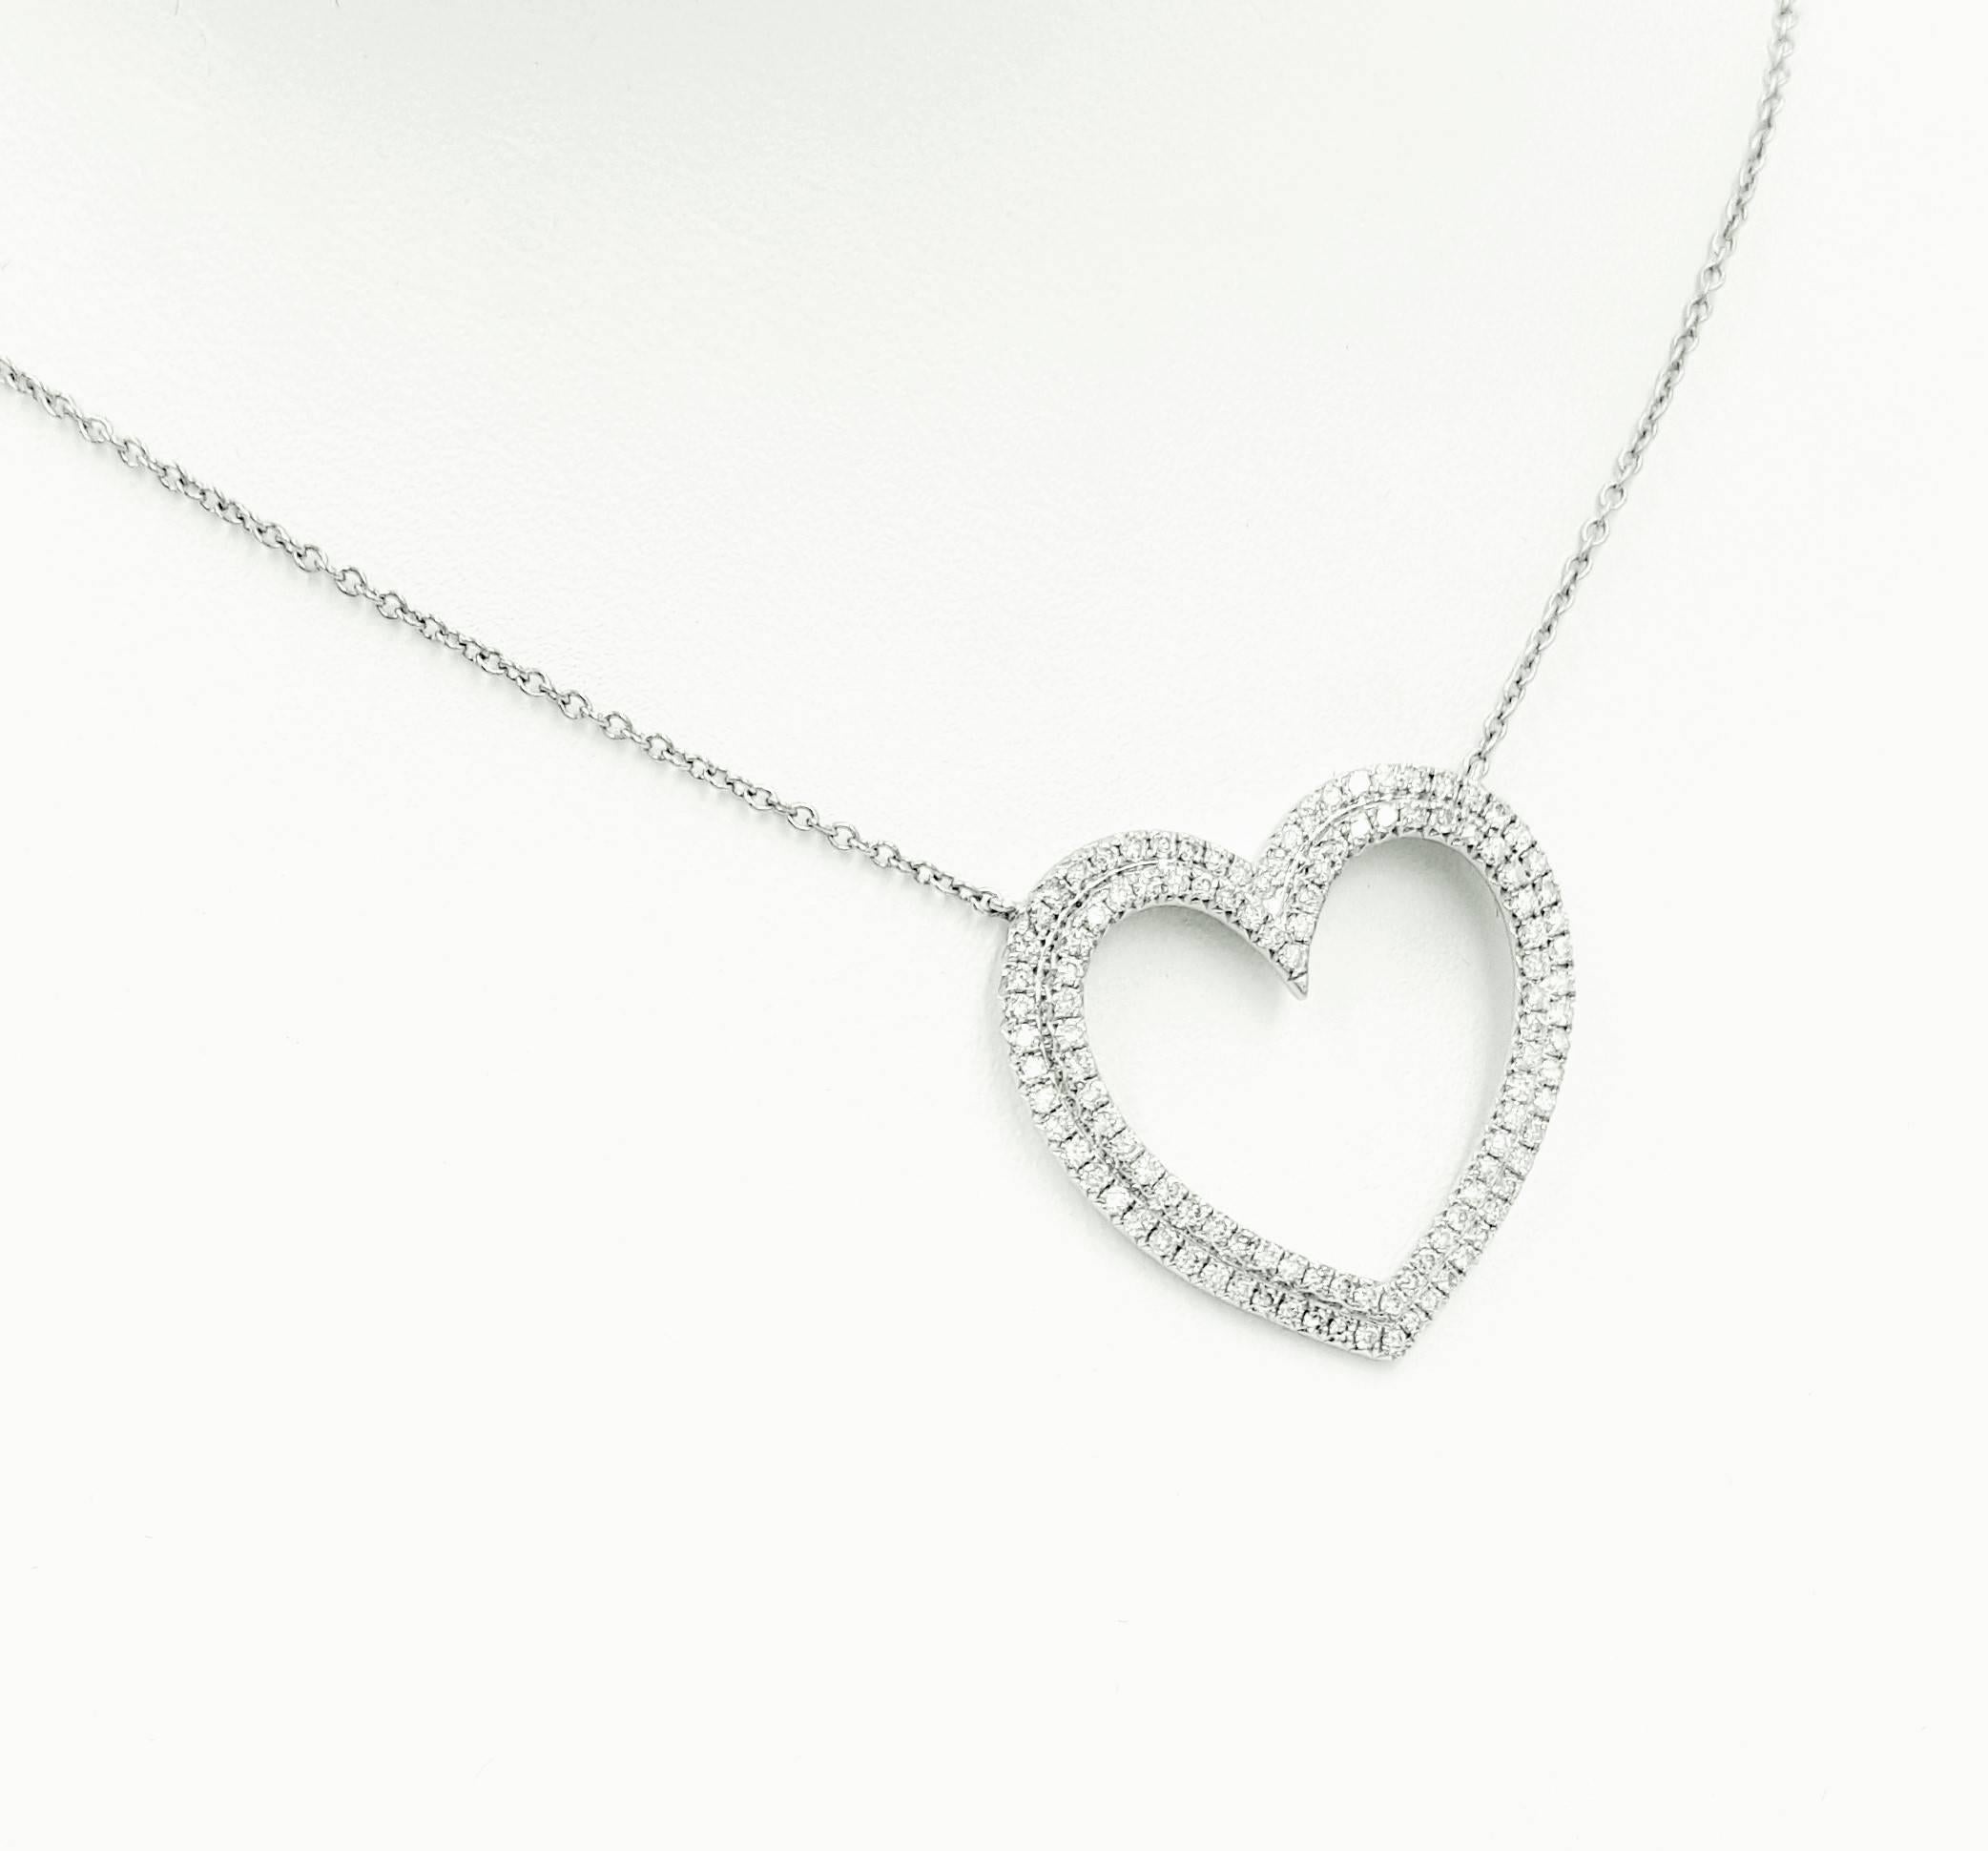 This extremely stunning & sensual Tiffany & Co. Large Size Metro Double Row Heart 1.50 Carats of Diamonds Necklace is a one time find! This is a ceased production piece in platinum and gets more rare by the second. Gorgeous in every way, featuring